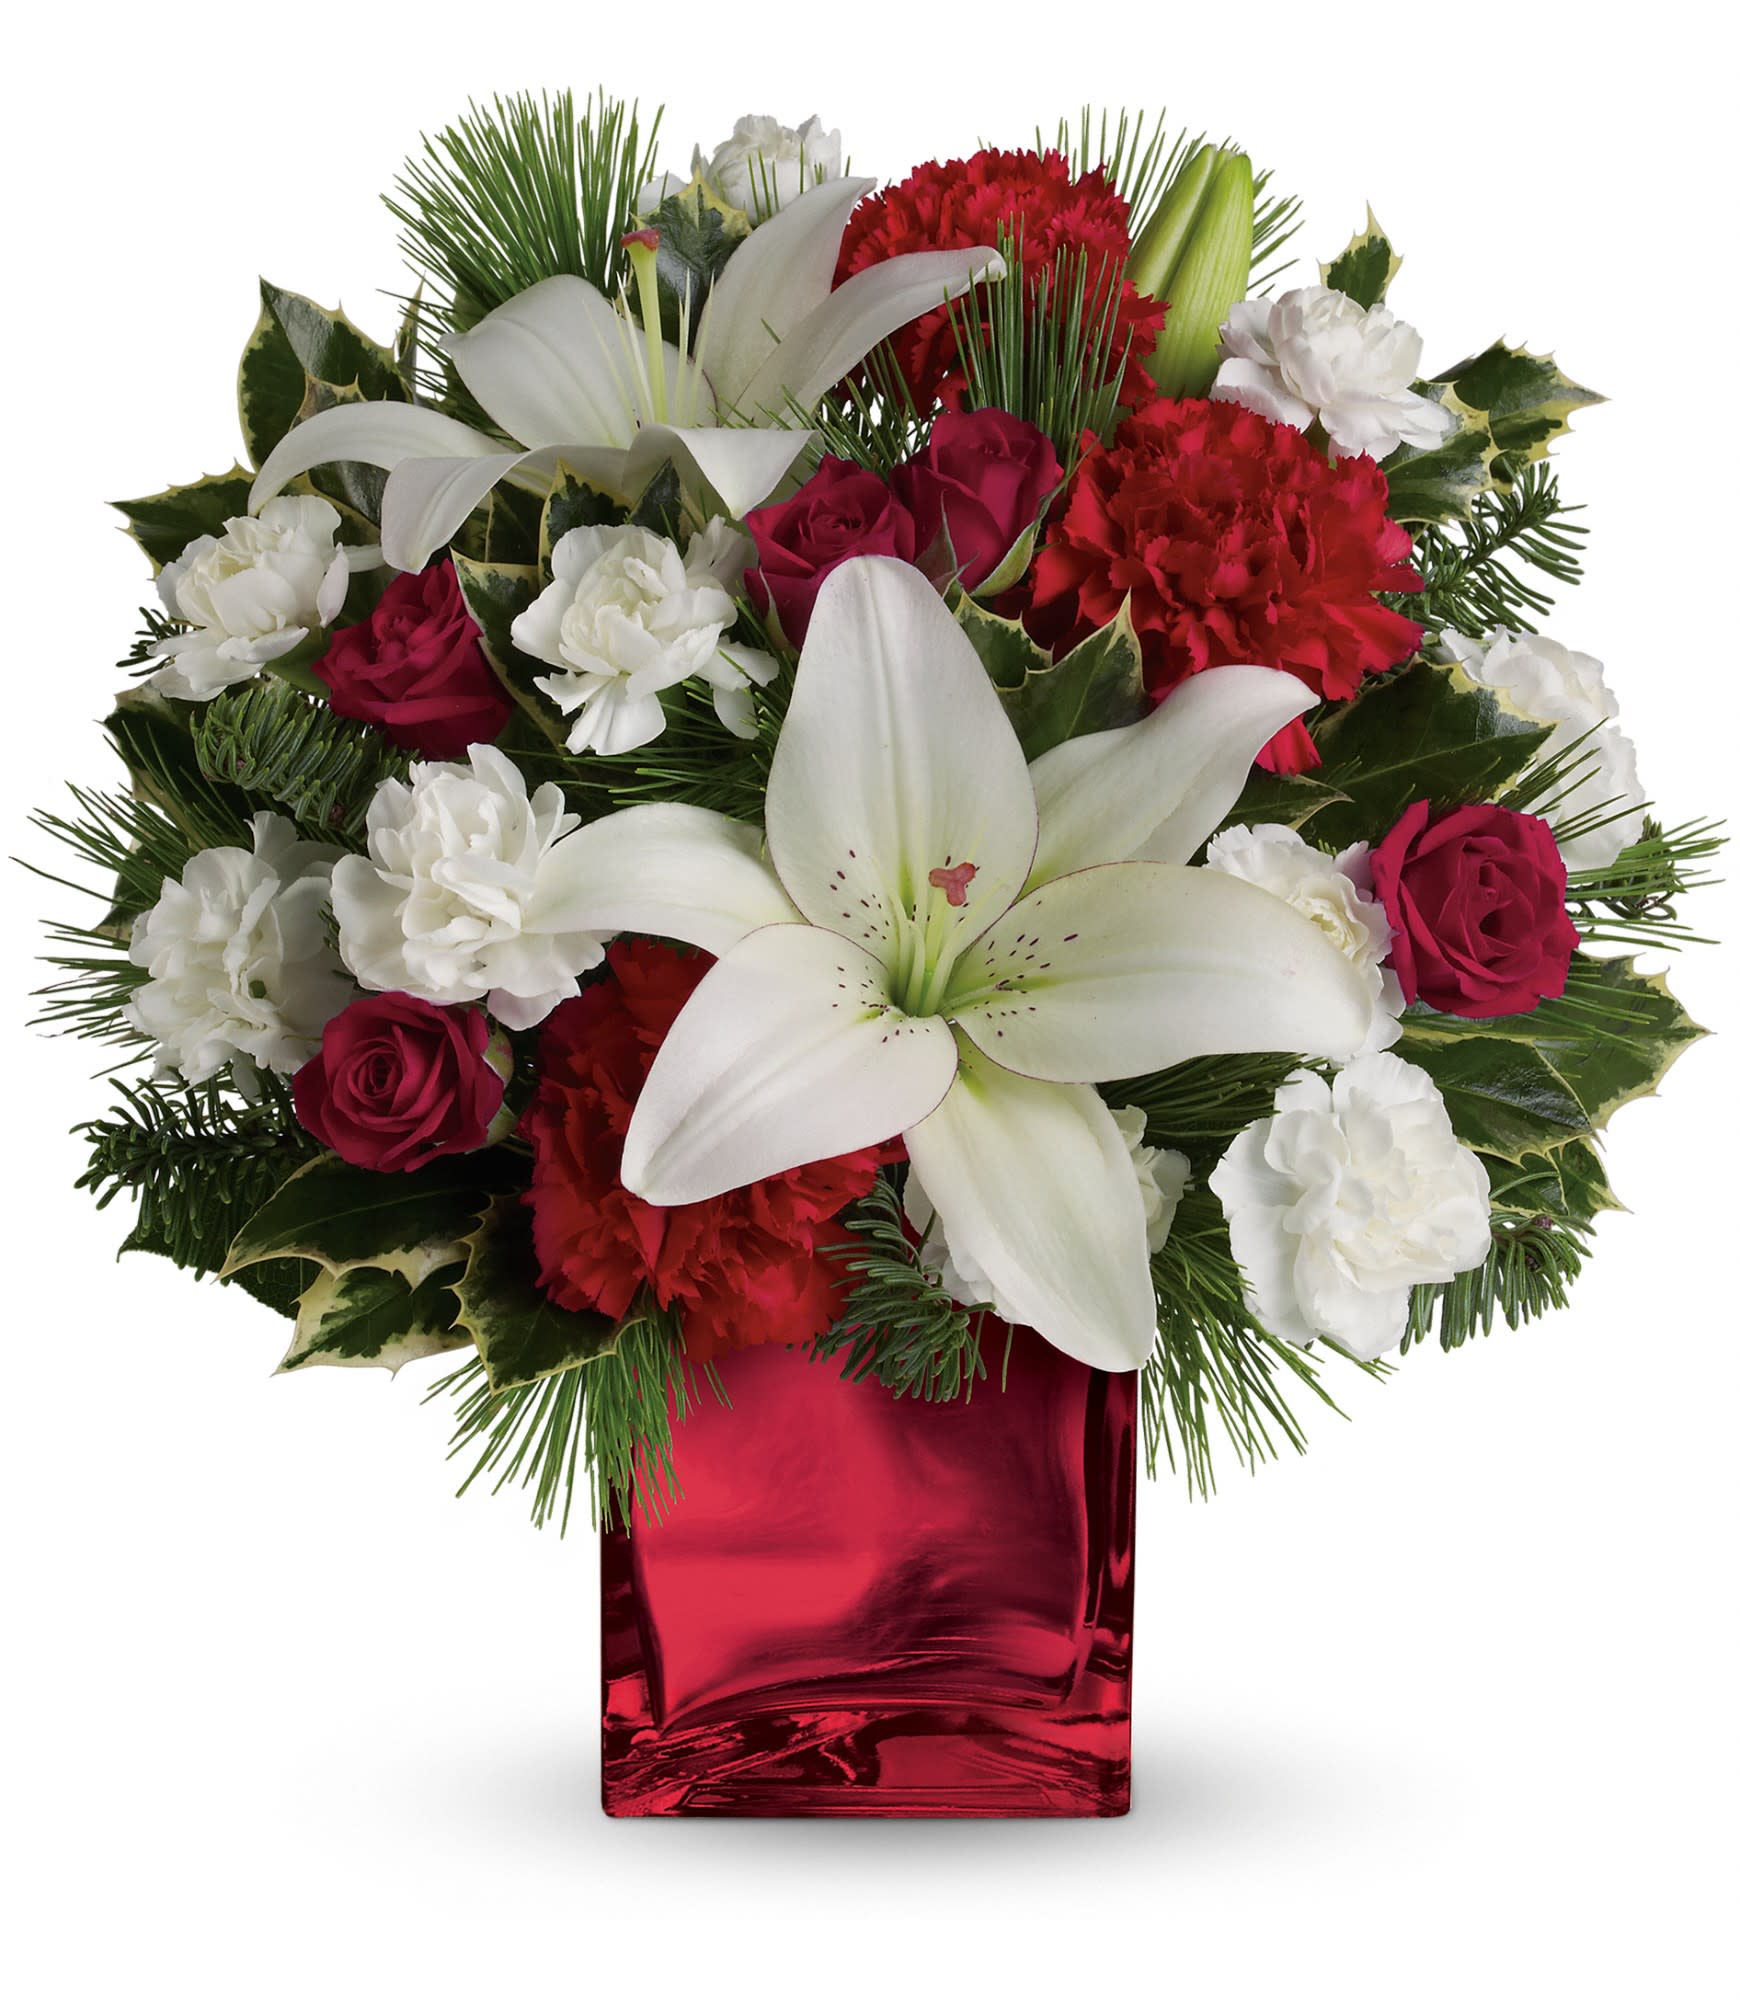 Caroling in the Snow by Teleflora - Red spray roses, white asiatic lilies and red carnations are accented by tips of white pine, noble fir and holly. Delivered in Teleflora's red mirrored cube. Approximately 12 1/2&quot; W x 12 1/2&quot; H